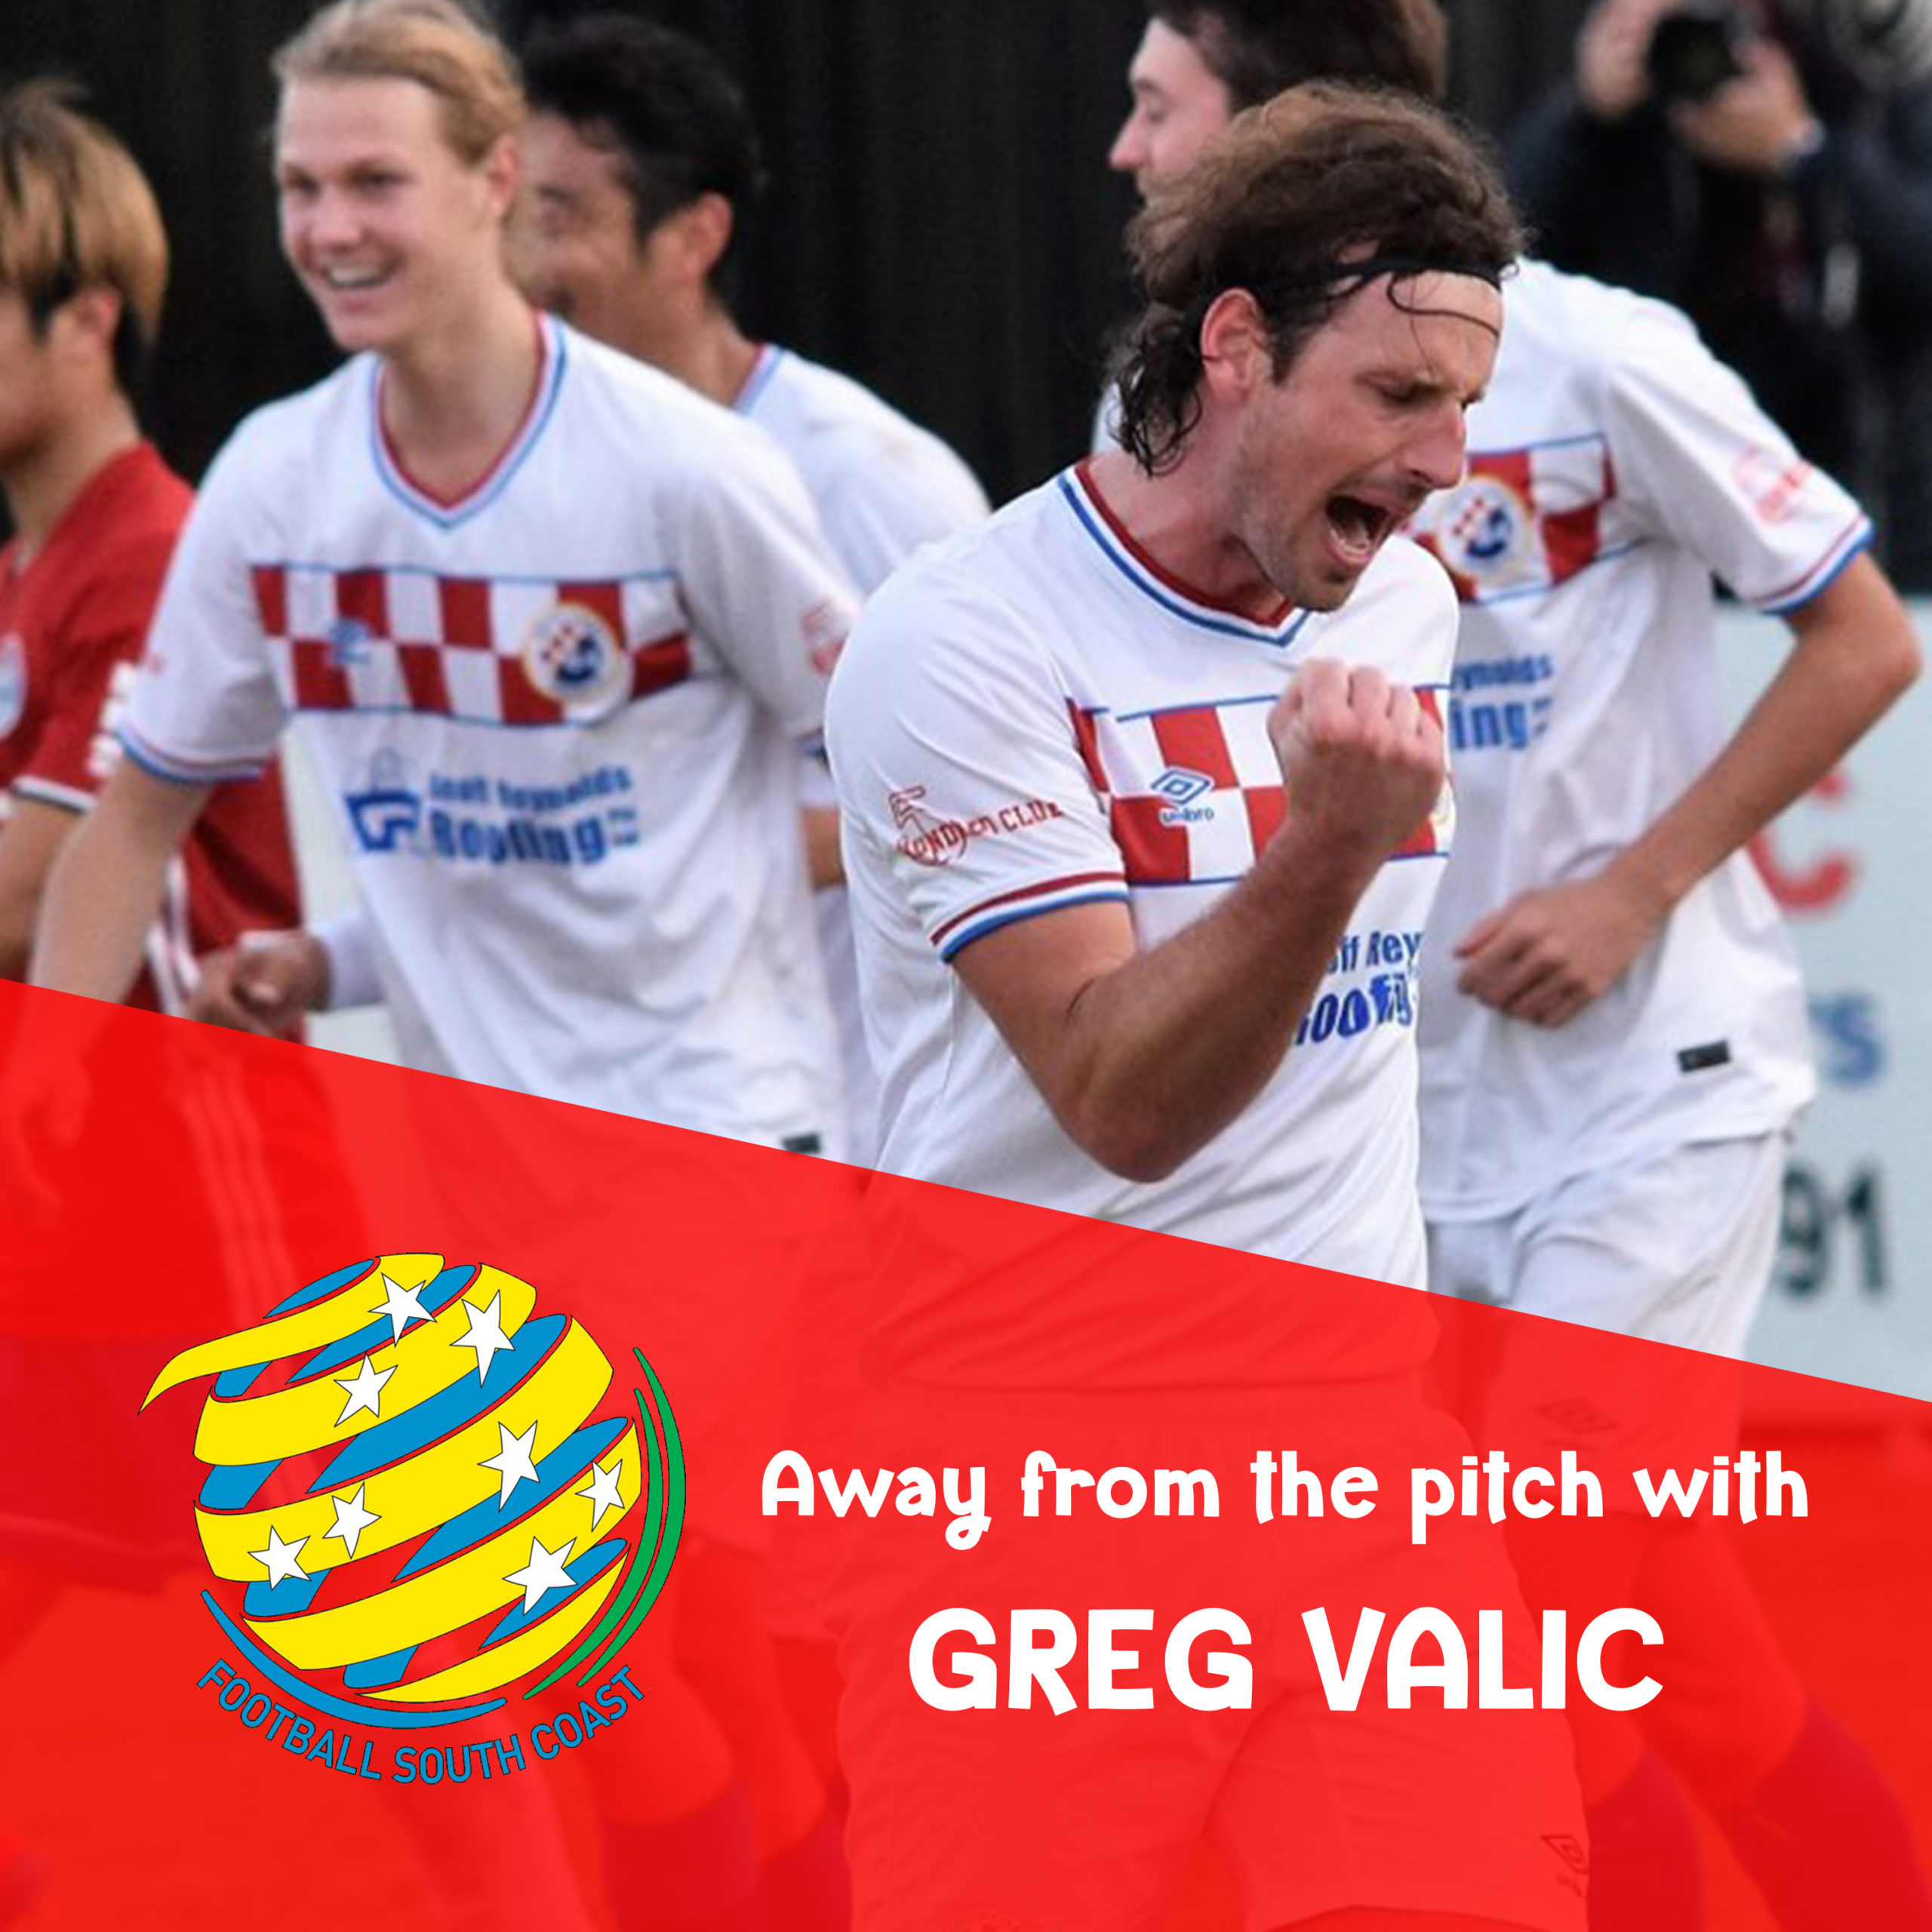 Away from the pitch with Greg Valic artwork